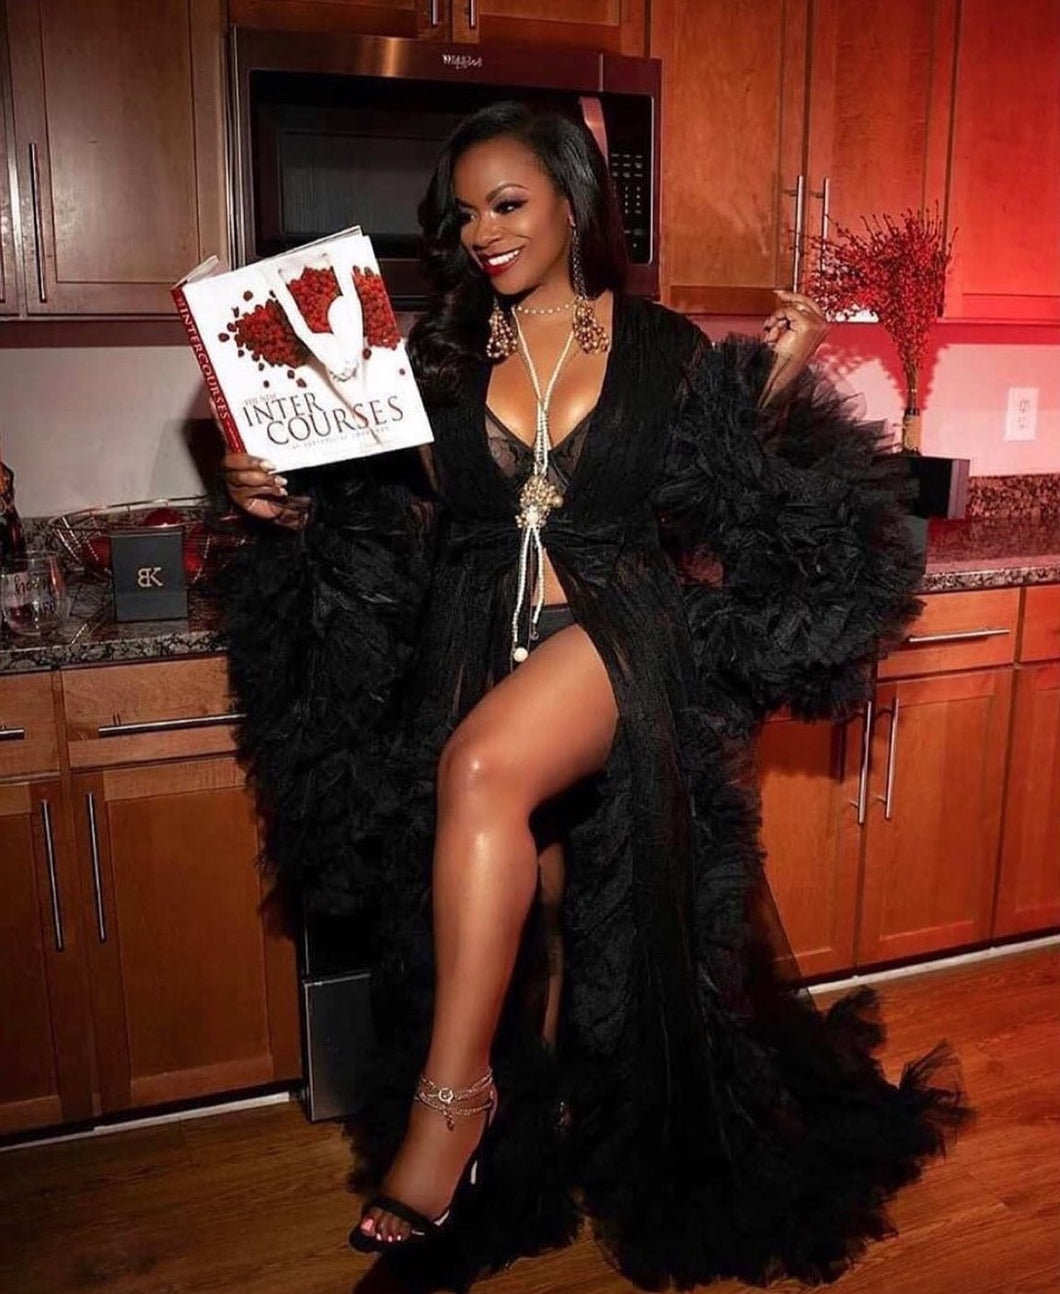 Kandi Burruss (Real Housewives of Atlanta) in Tulle Robe